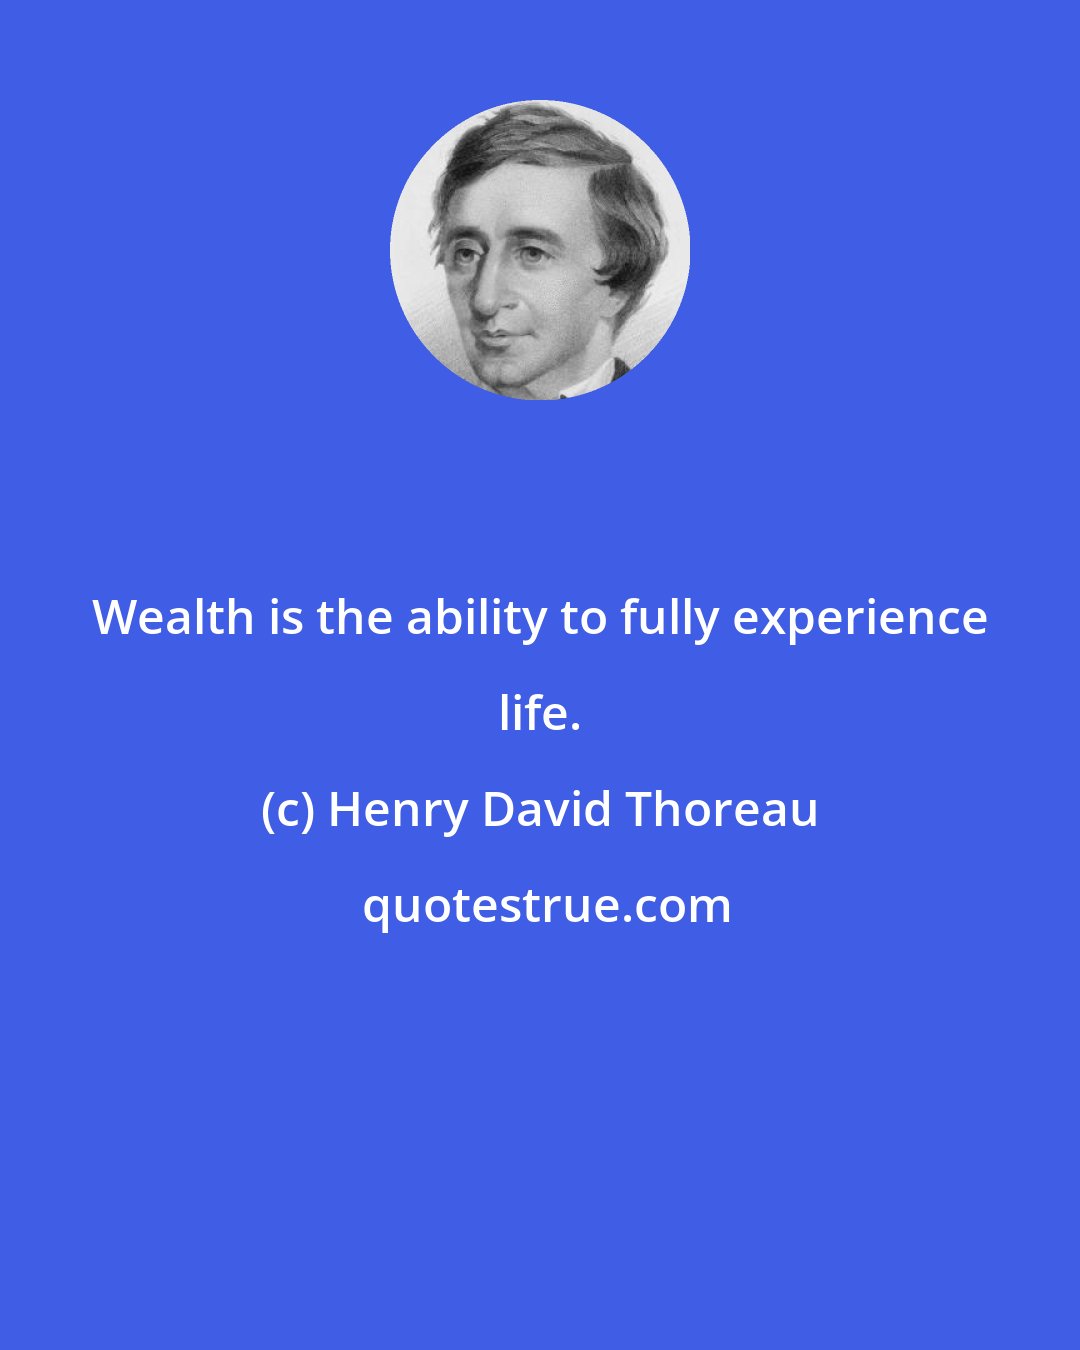 Henry David Thoreau: Wealth is the ability to fully experience life.